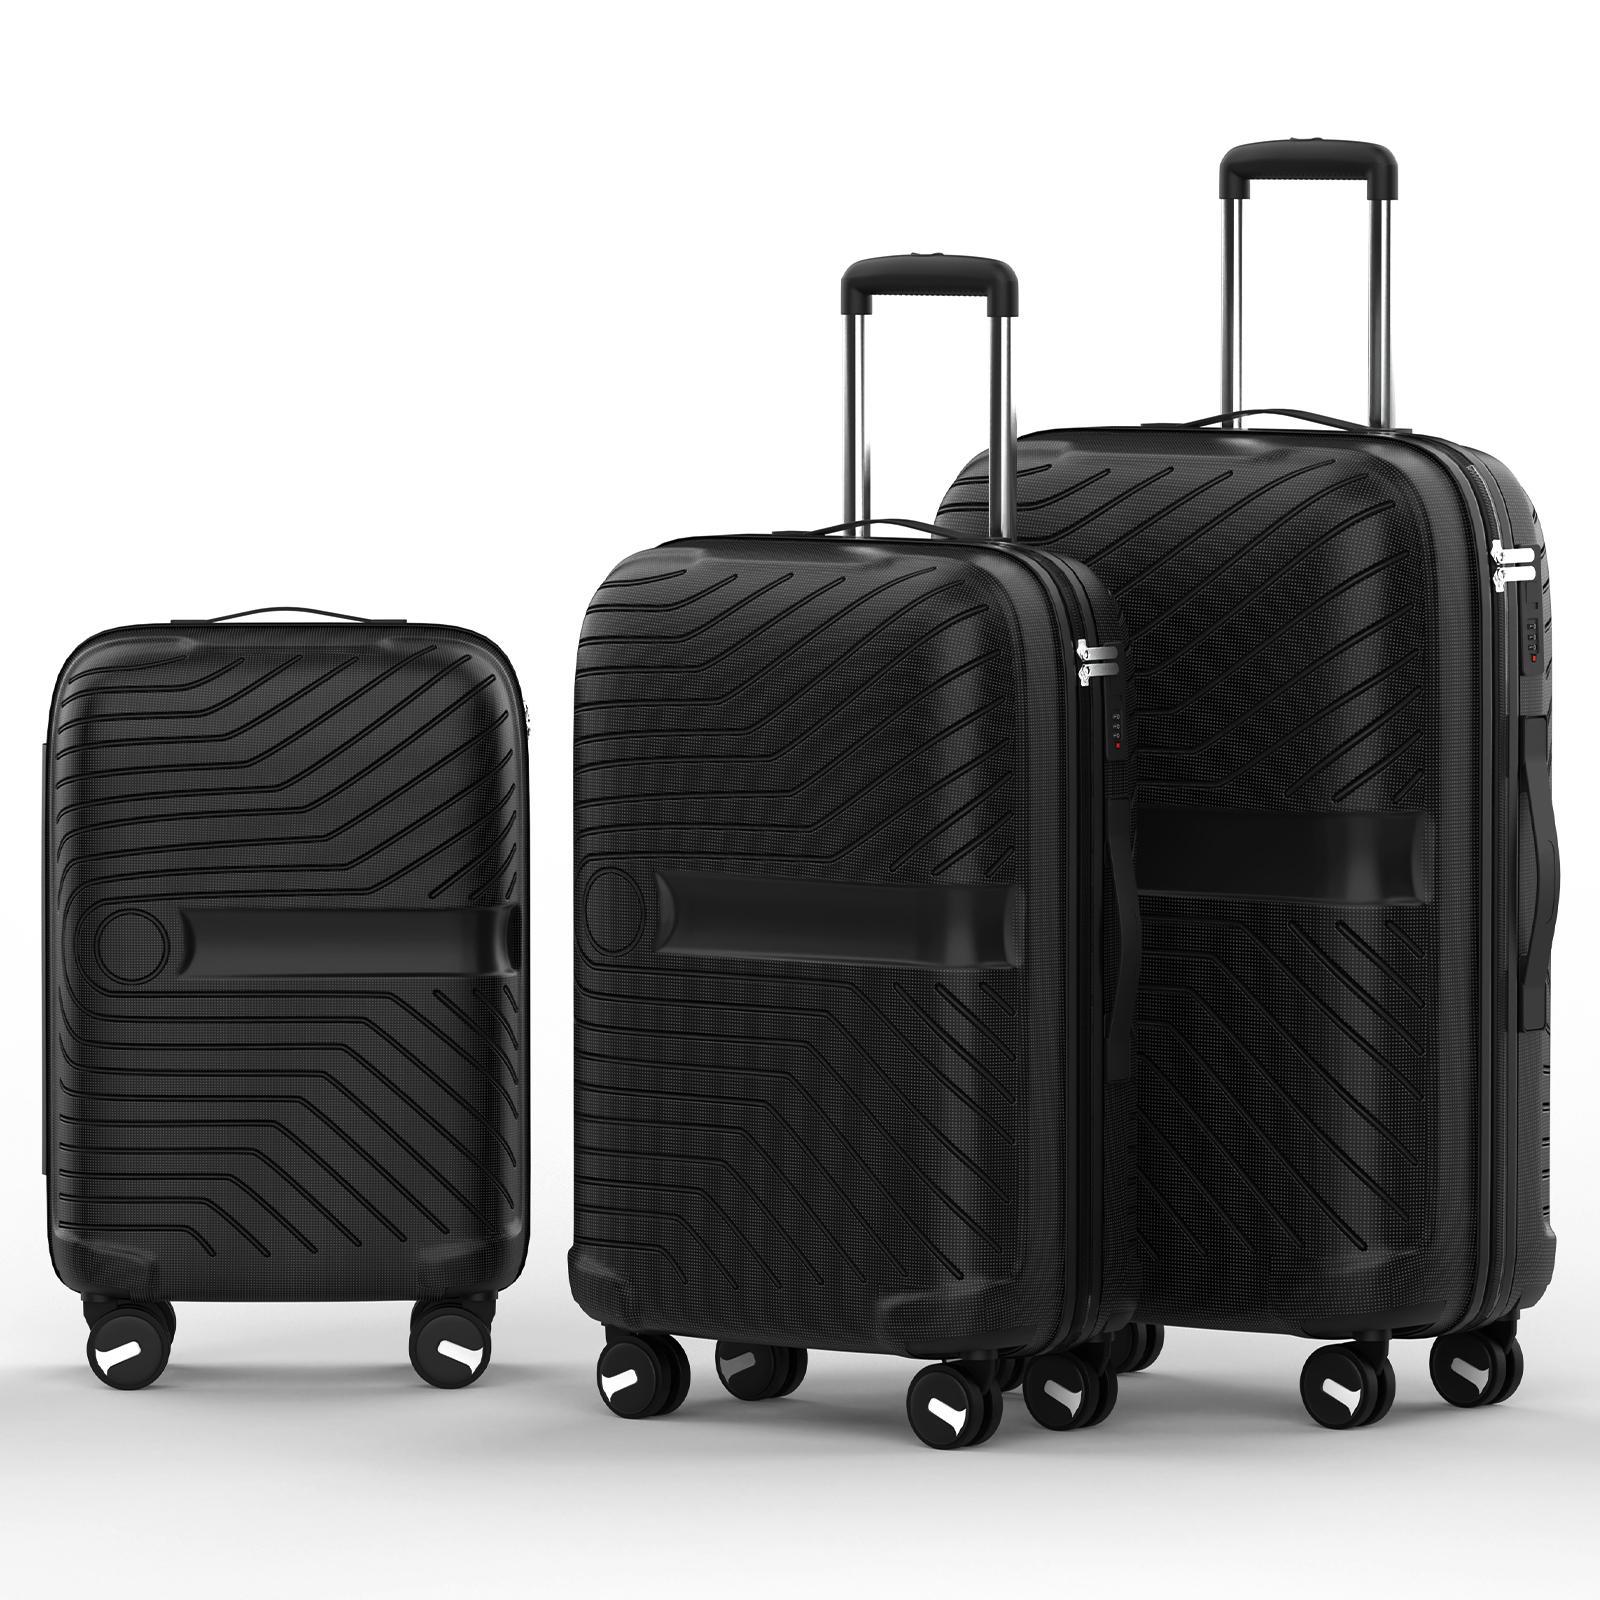 Advwin Luggage Sets 3 Piece Suitcase with Spinner Wheels Durable Retractable Pull Bars Black 20"/24"/28"